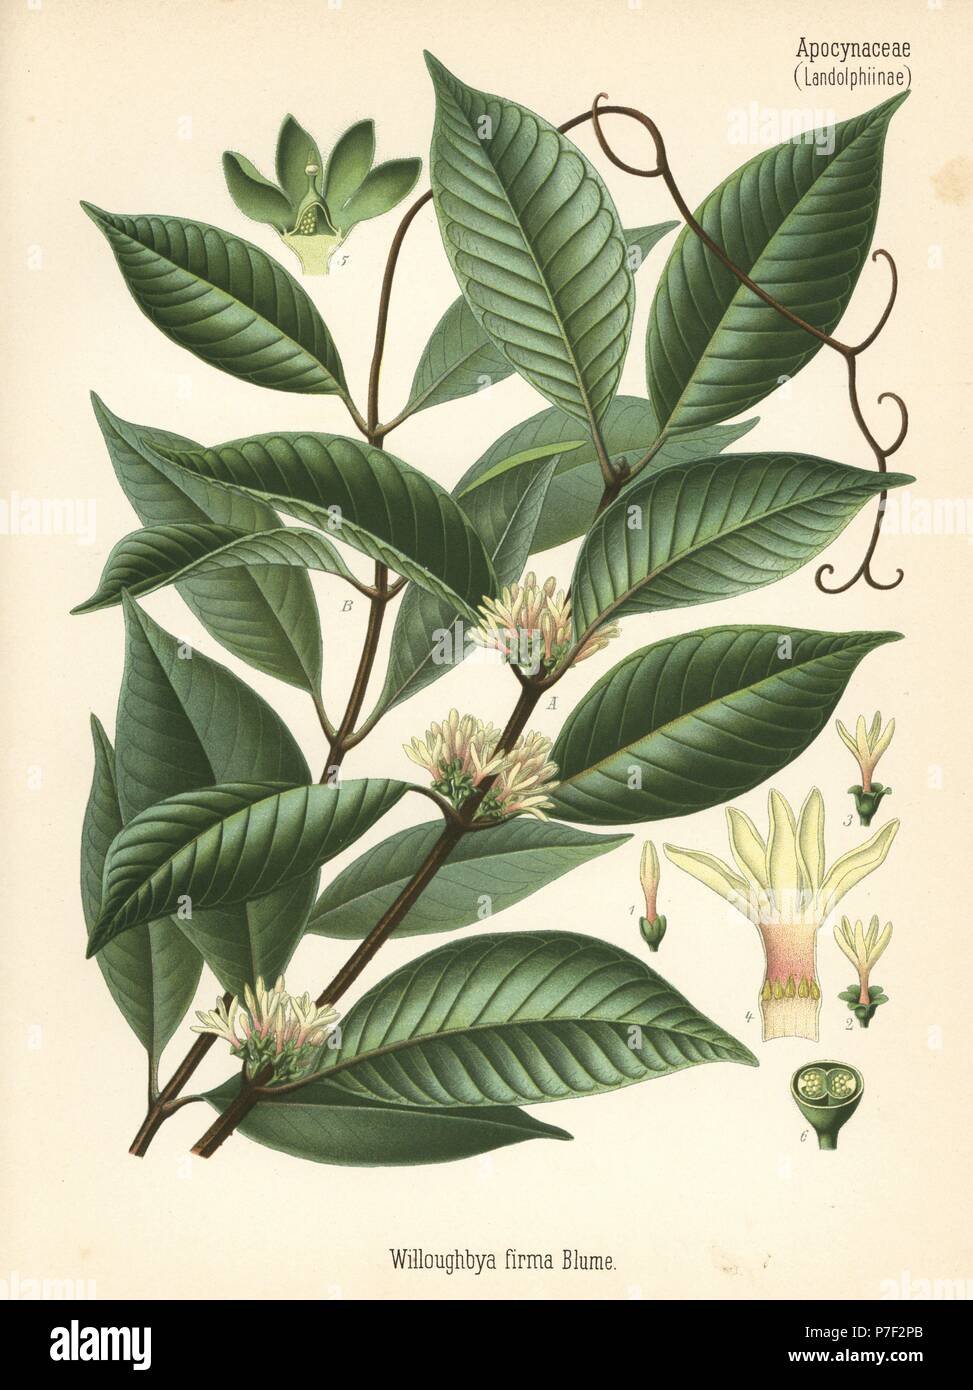 Willughbeia coriacea (Willoughbya firma). Chromolithograph after a botanical illustration from Hermann Adolph Koehler's Medicinal Plants, edited by Gustav Pabst, Koehler, Germany, 1887. Stock Photo